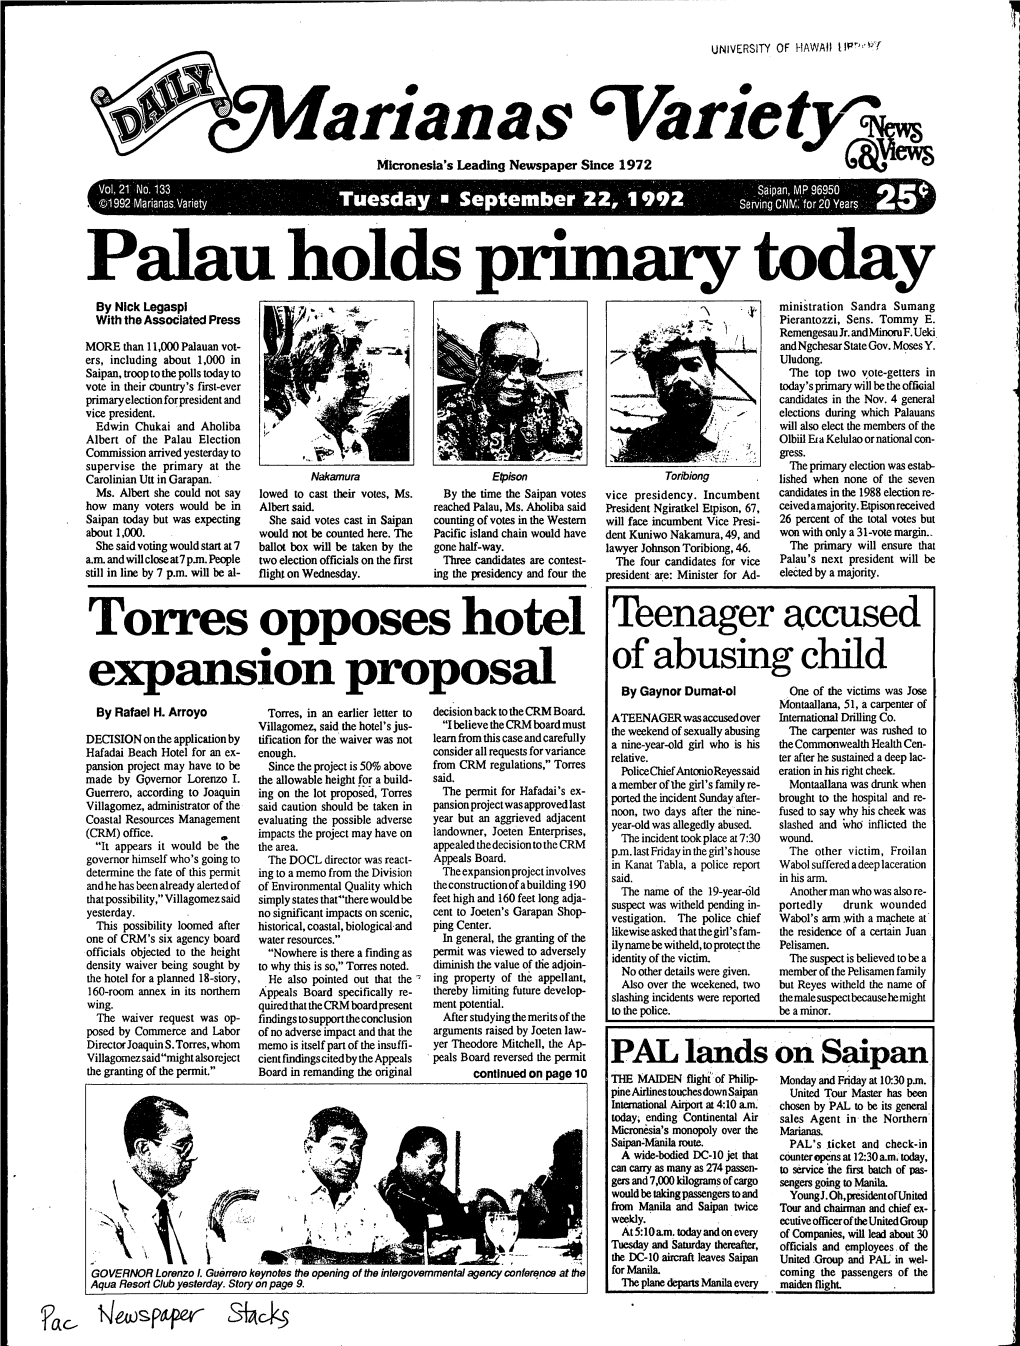 Palau Holds Primary Today by Nick Legaspi Ministration Sandra Sumang with the Associated Press Pierantozzi, Sens